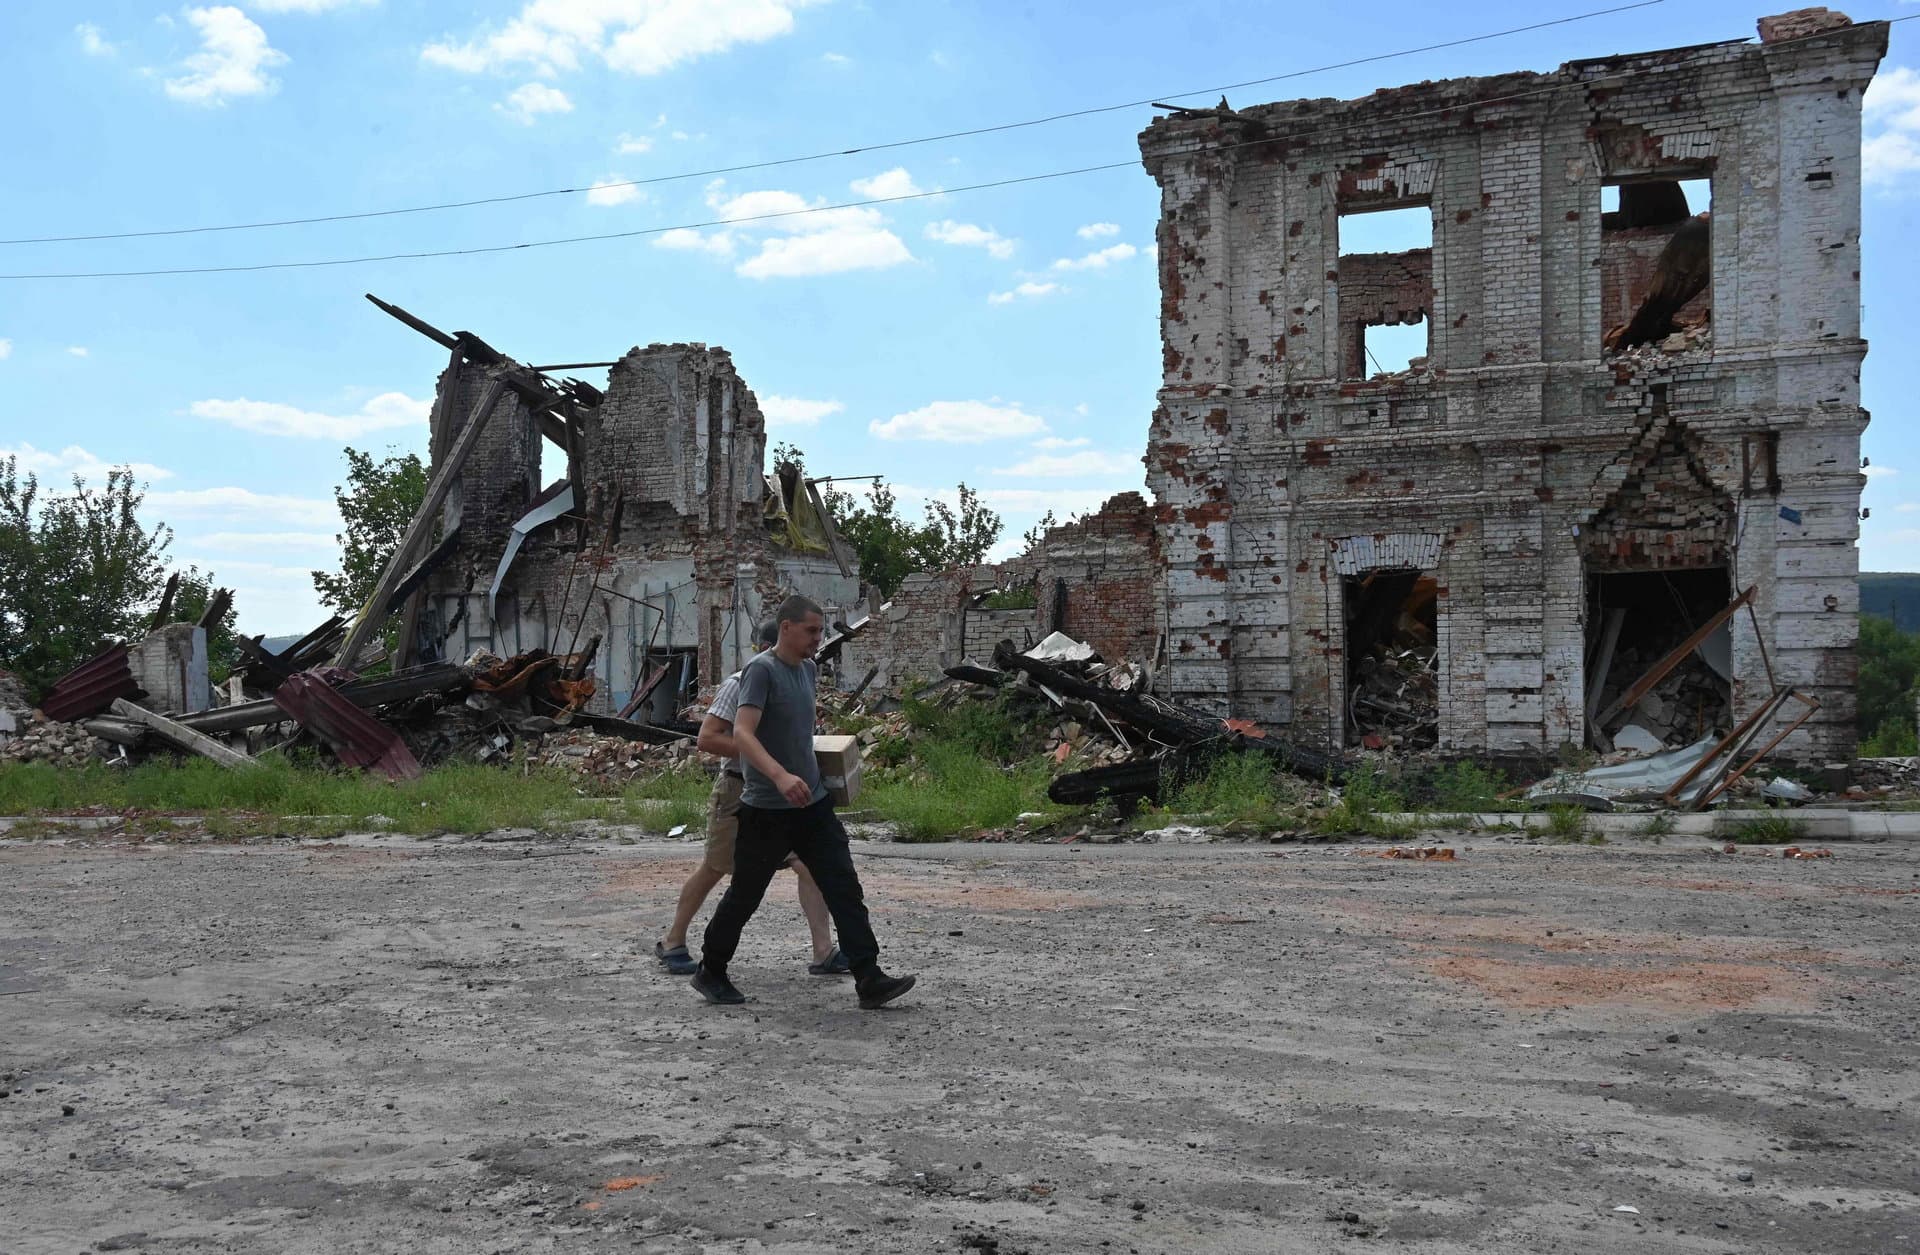 Local residents walk past a destoyed building in the town of Kupiansk